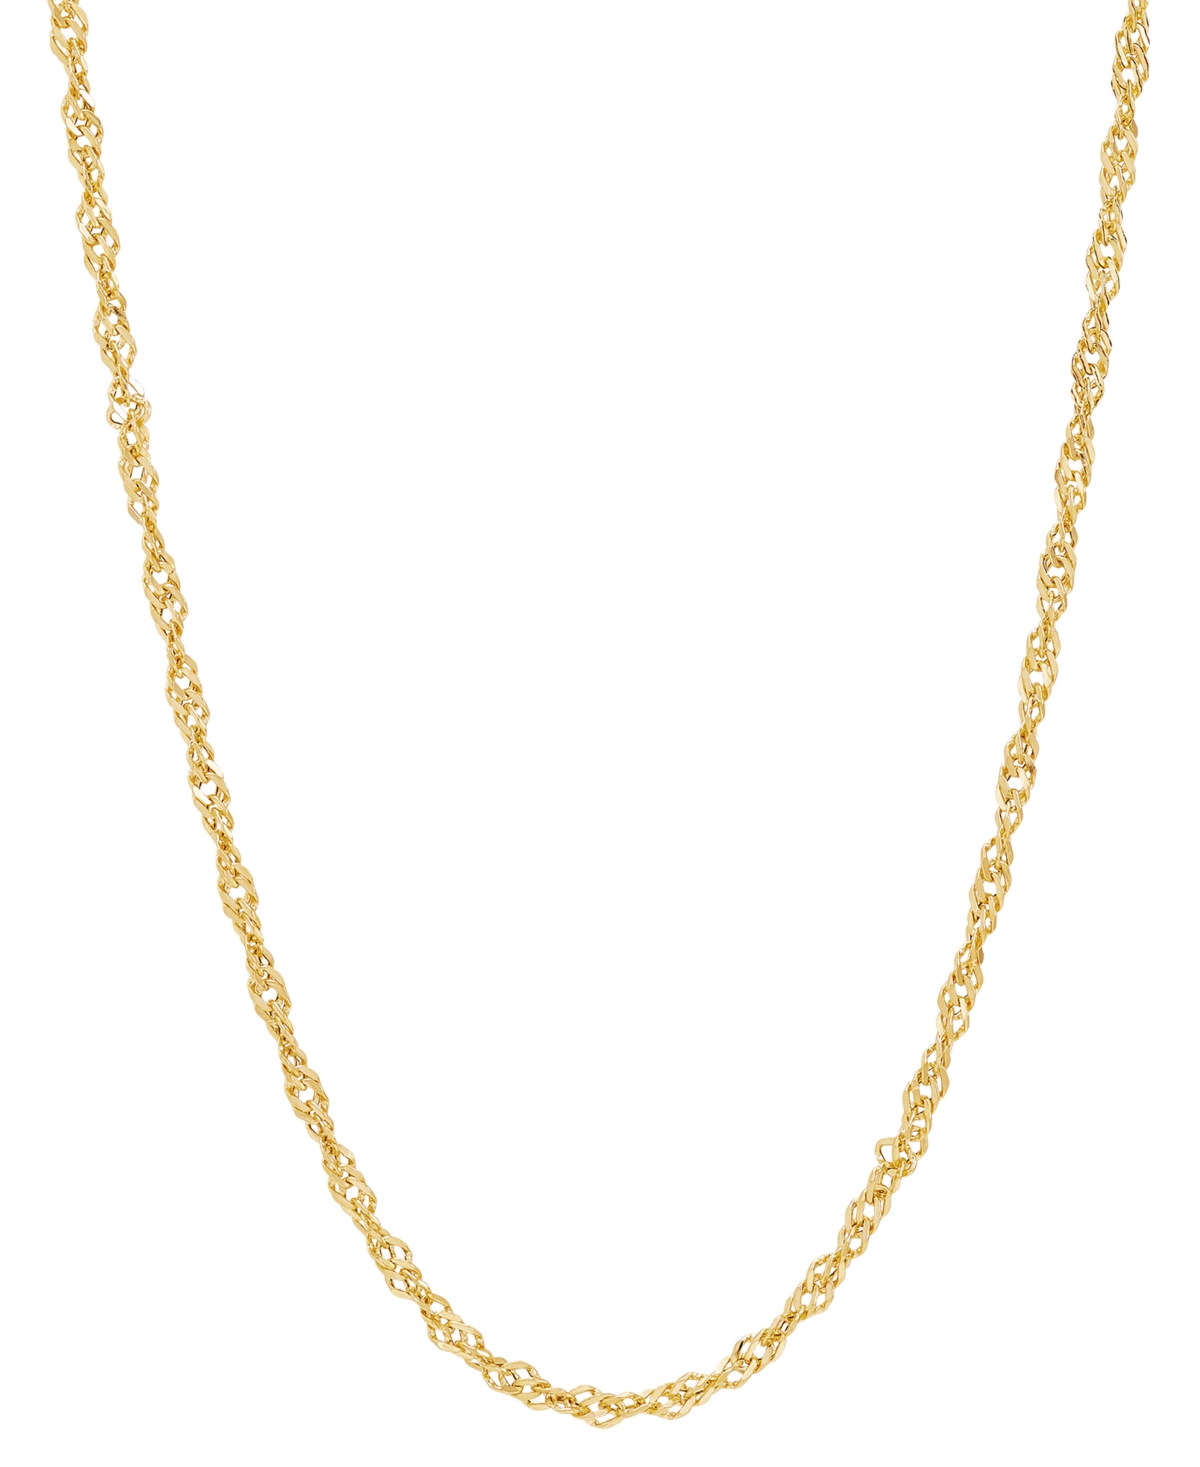 Italian Gold Singapore Link 20" Chain Necklace In 14k Gold